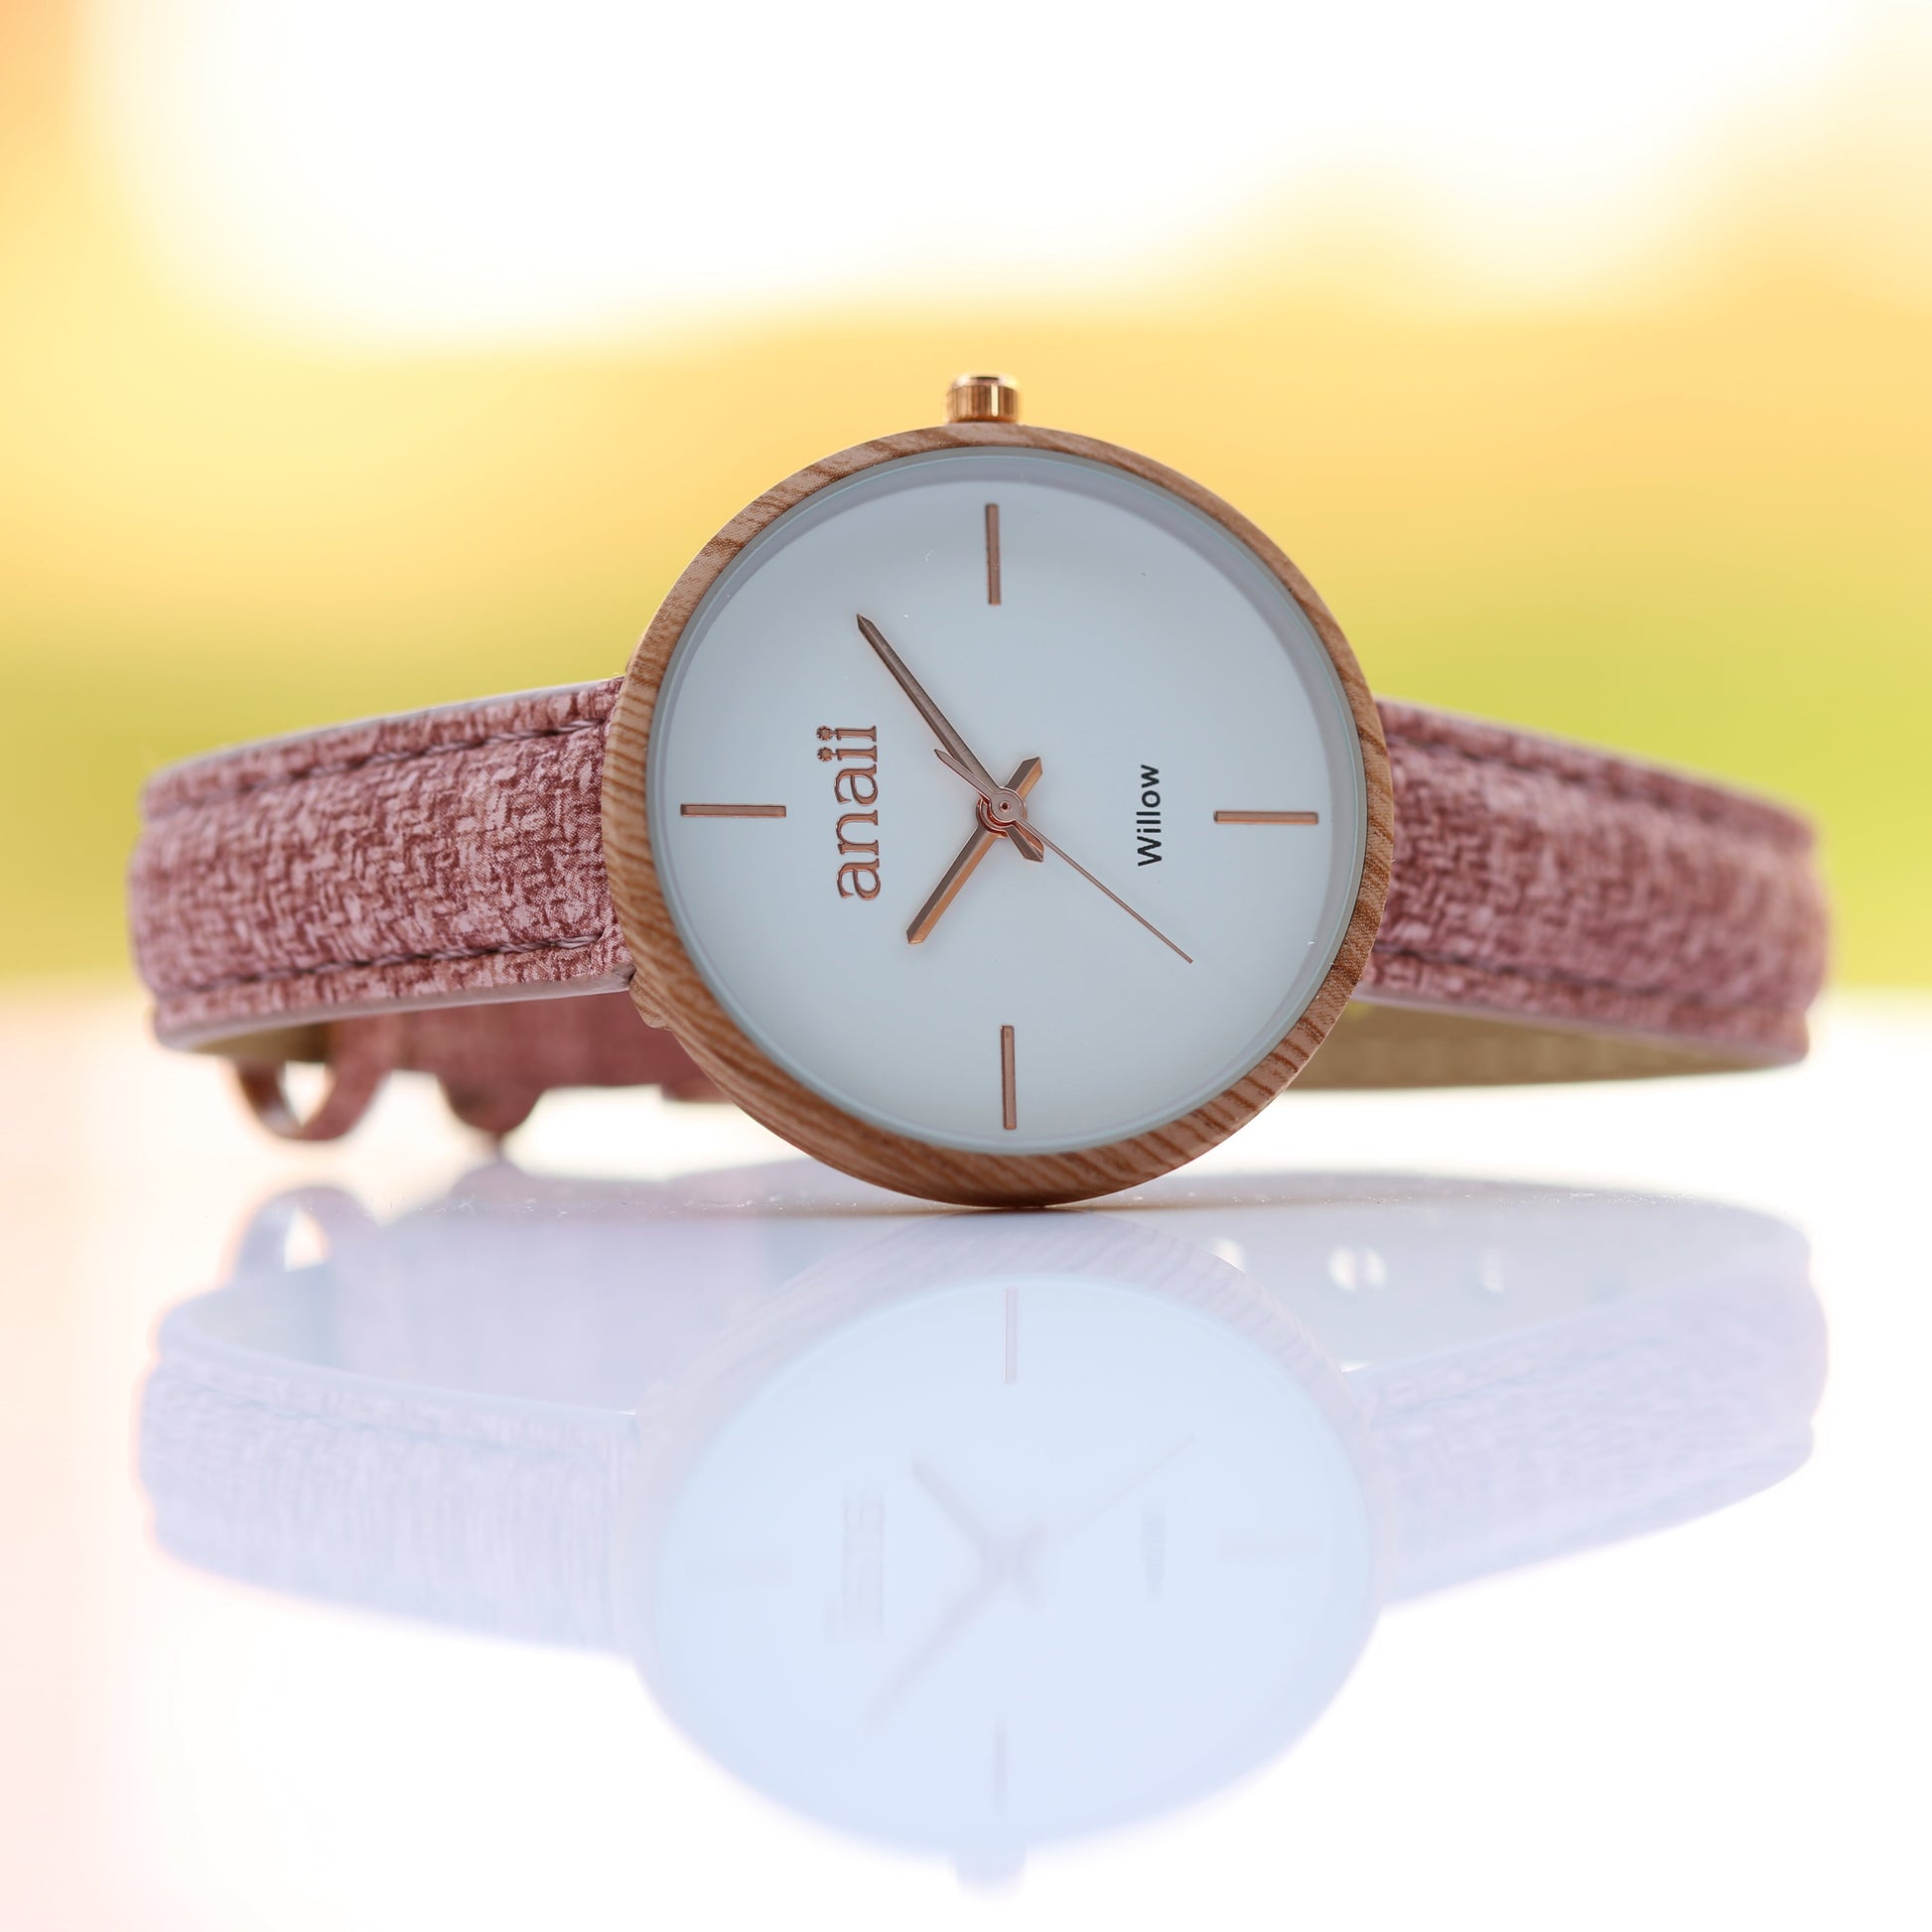 Personalized Ladies' Watches - Handwriting Engraved Watch in Sweet Pink 